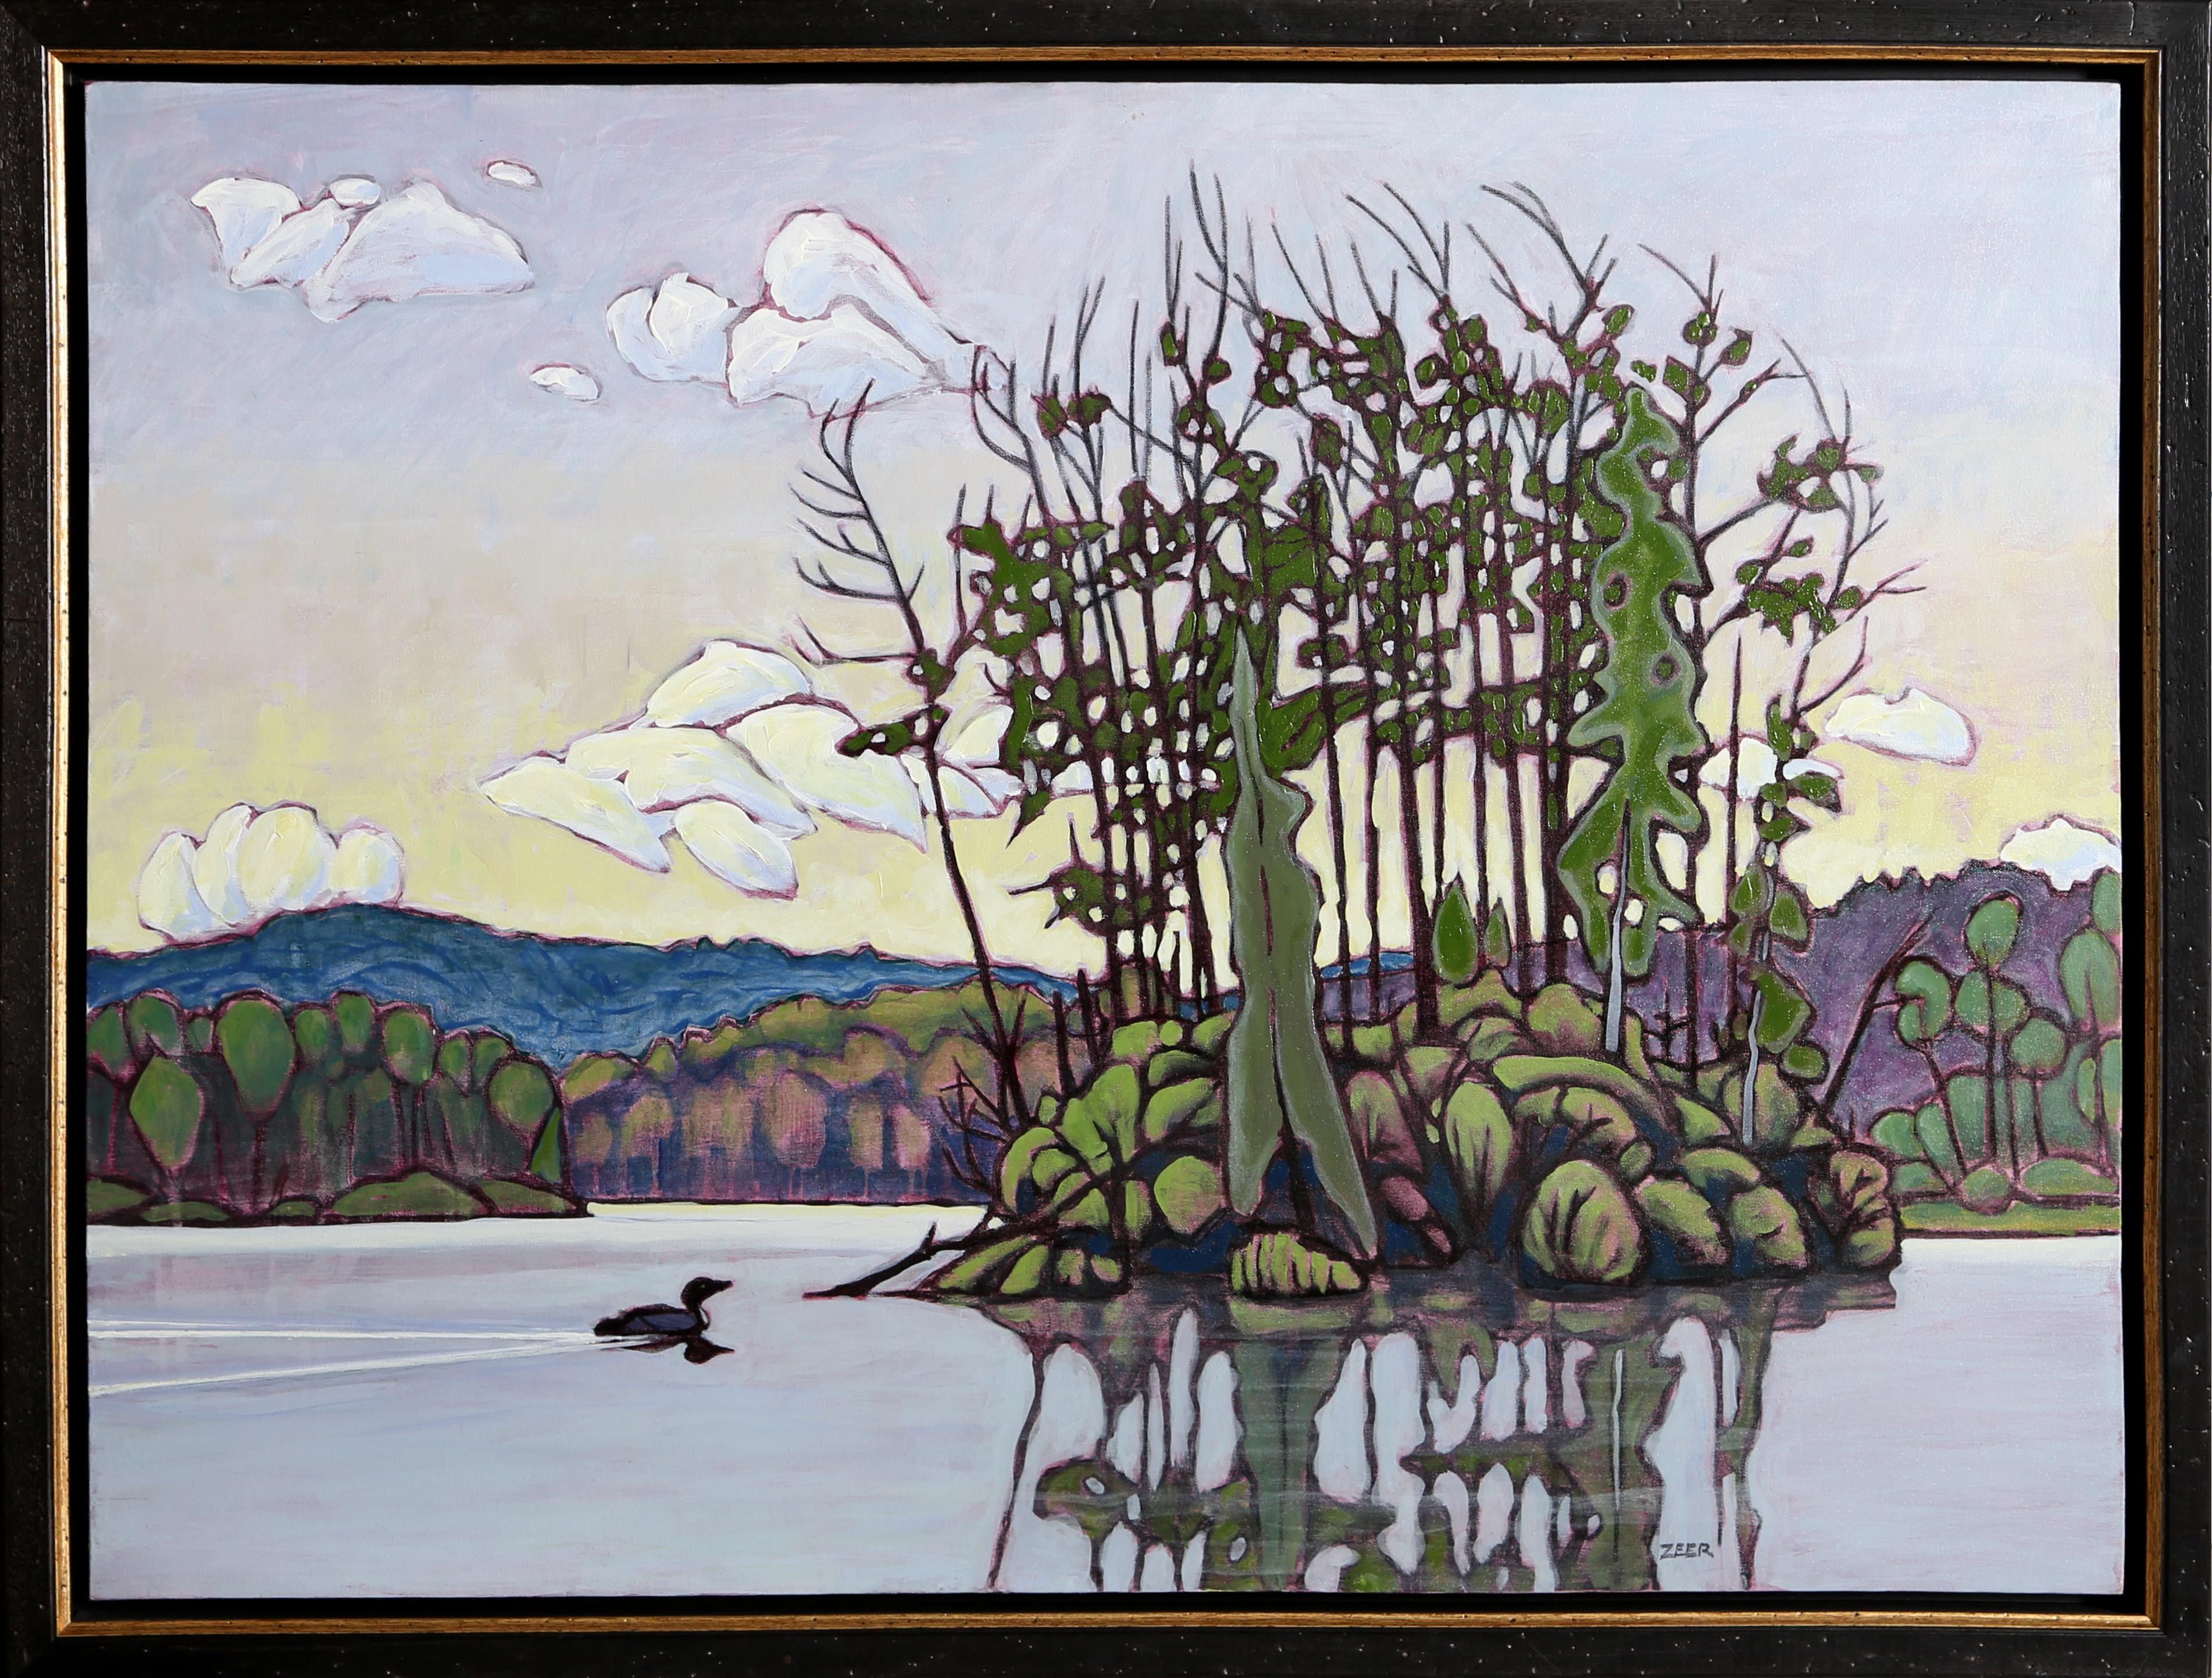 Artist: Robert Zeer
Title: Loon on Opeonga Lake
Year: 2002
Medium: Oil on Canvas, signed l.r.
Size: 30 x 40 in. (76.2 x 101.6 cm)
Frame: 33 x 43 inches